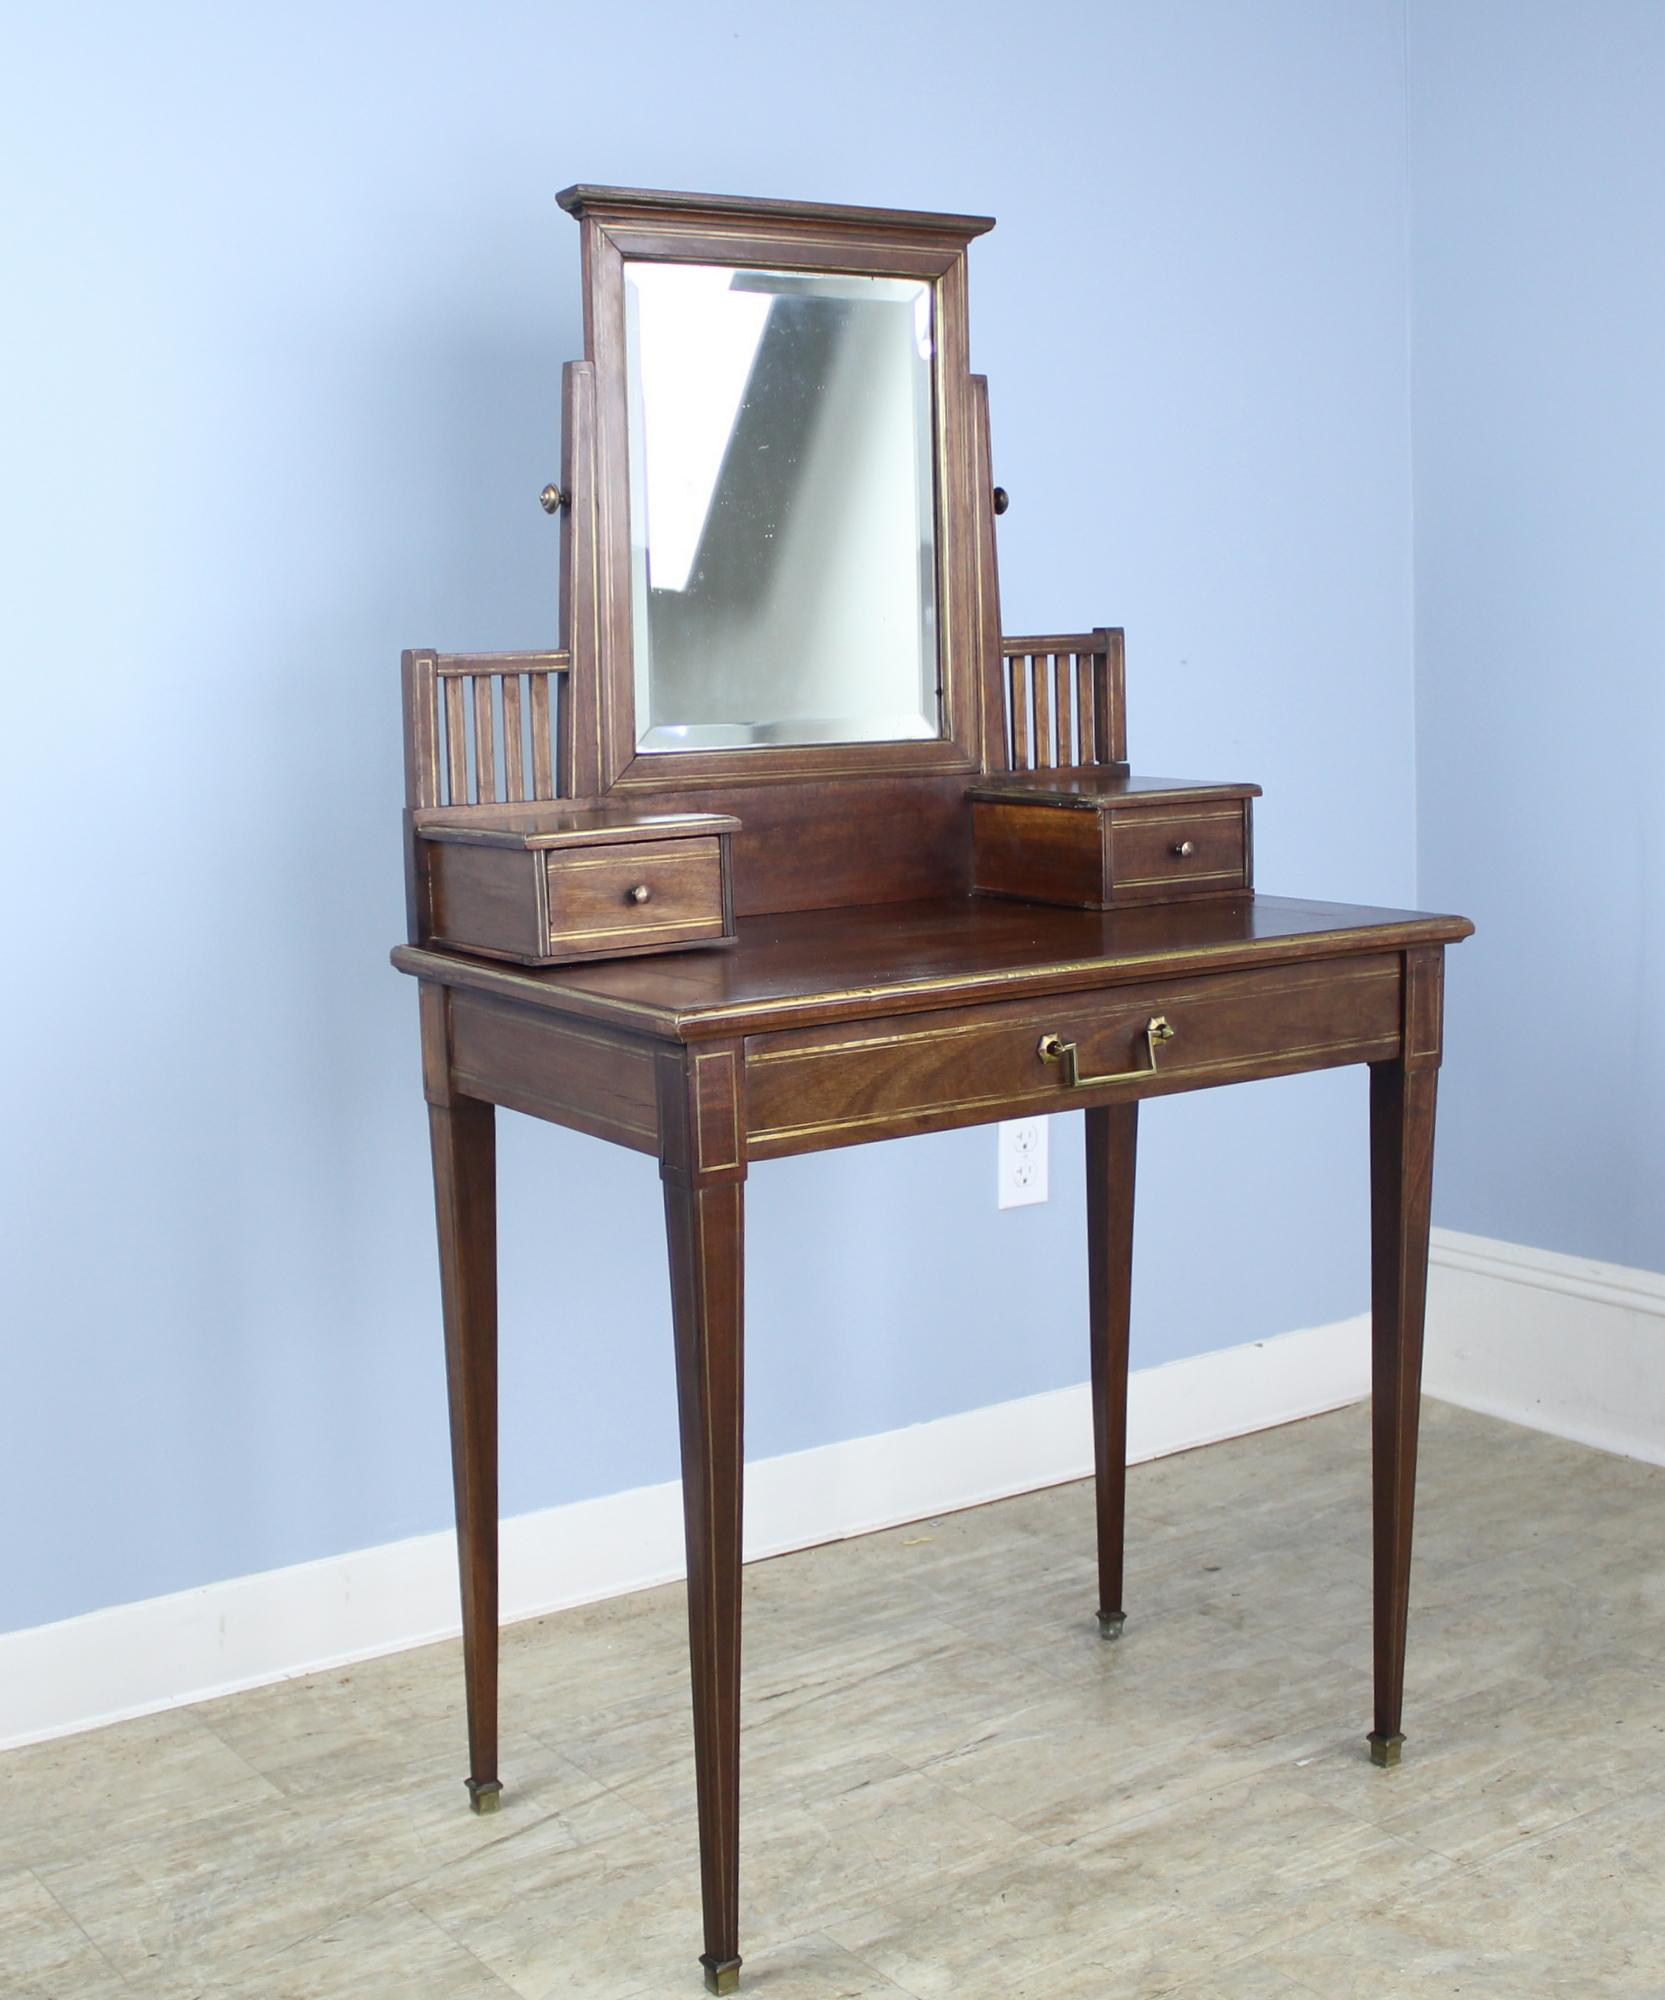 A dainty vanity or dressing table with brass details and three drawers, one wide single drawer in front and two smaller drawers for accessories. Original glass on the adjustable tilting mirror has some wear and a chip. Height measurement below is